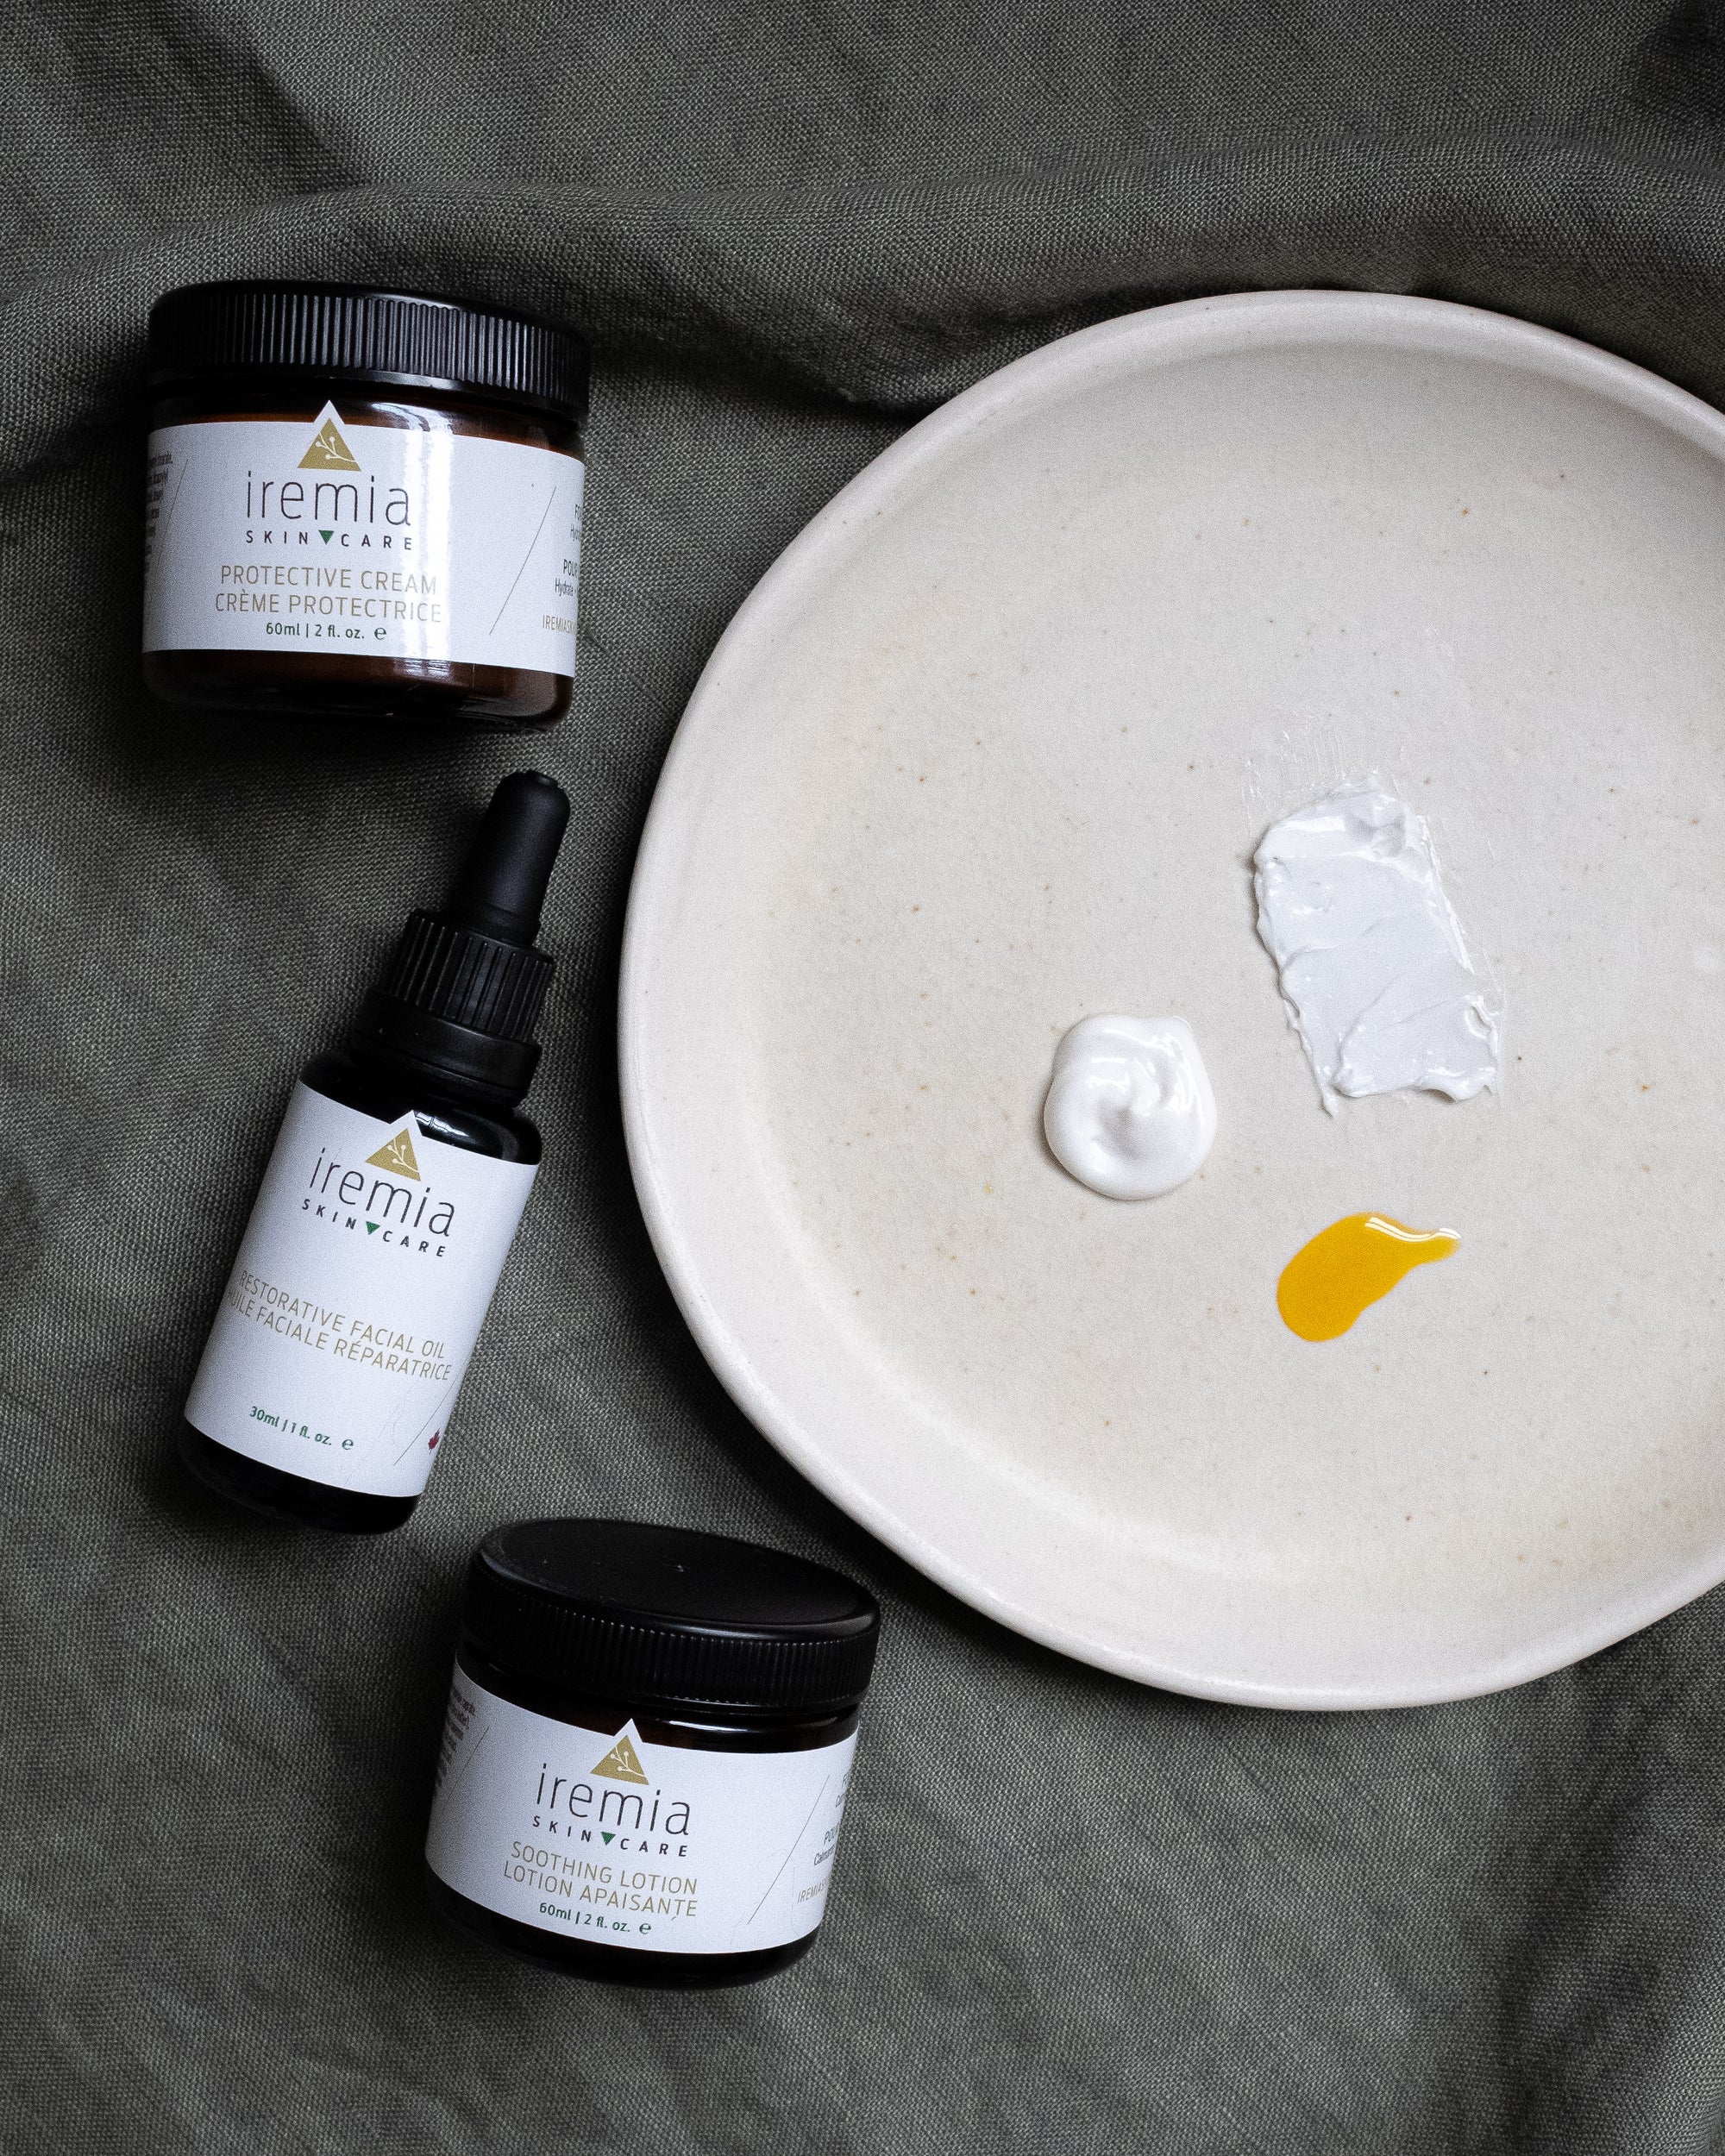 Iremia Skincare was designed with sensitive skin in mind and each product is created with natural ingredients that help calm your skin while giving it the nutrients and hydration it needs to thrive.